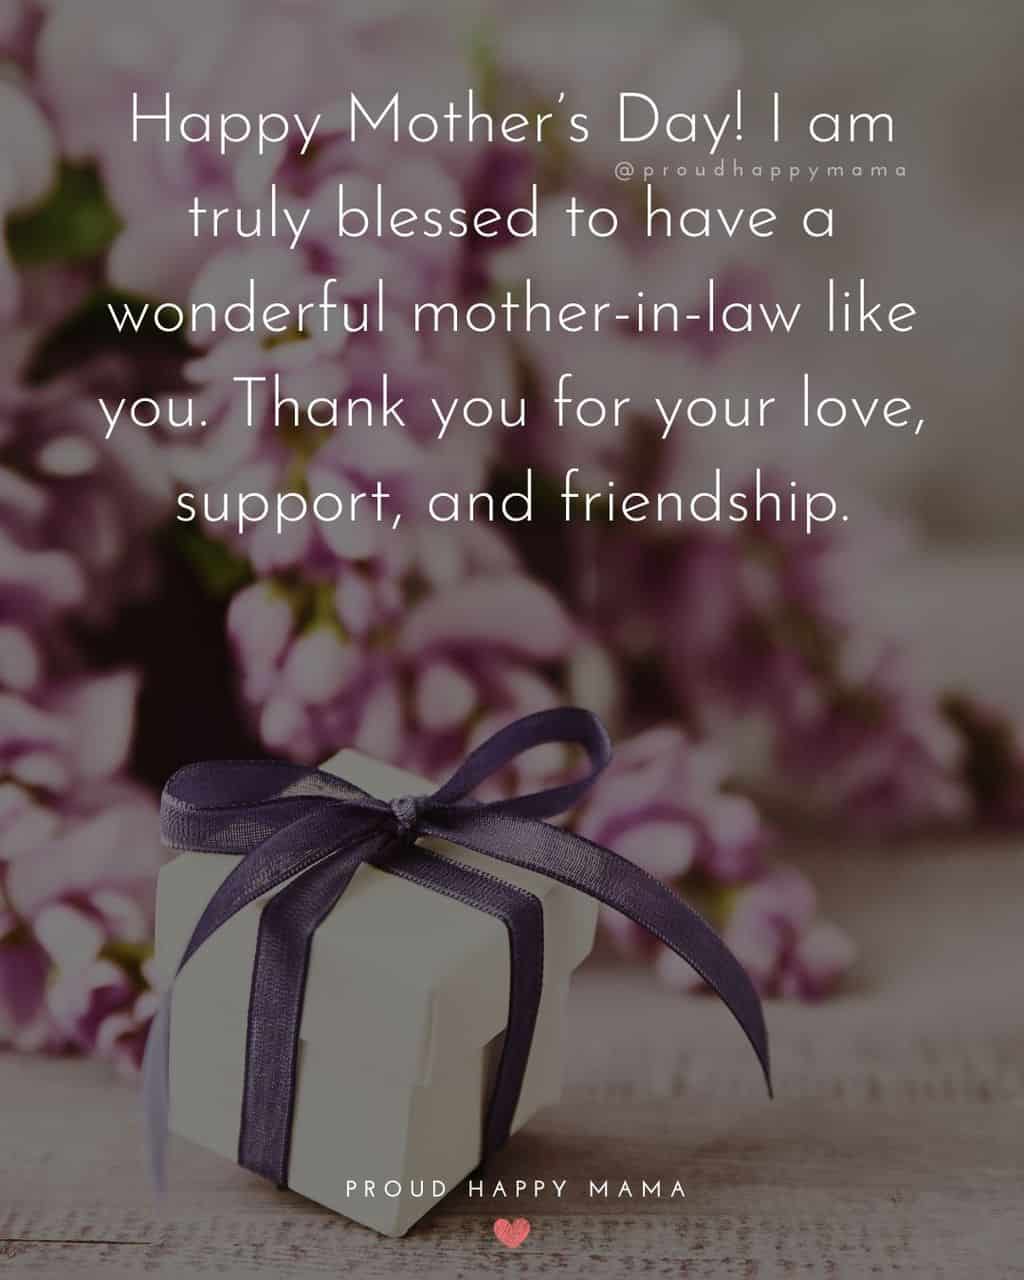 Happy Mothers Day Quotes For Mother In Law - Happy Mother’s Day! I am truly blessed to have a wonderful mother in law like you. Thank